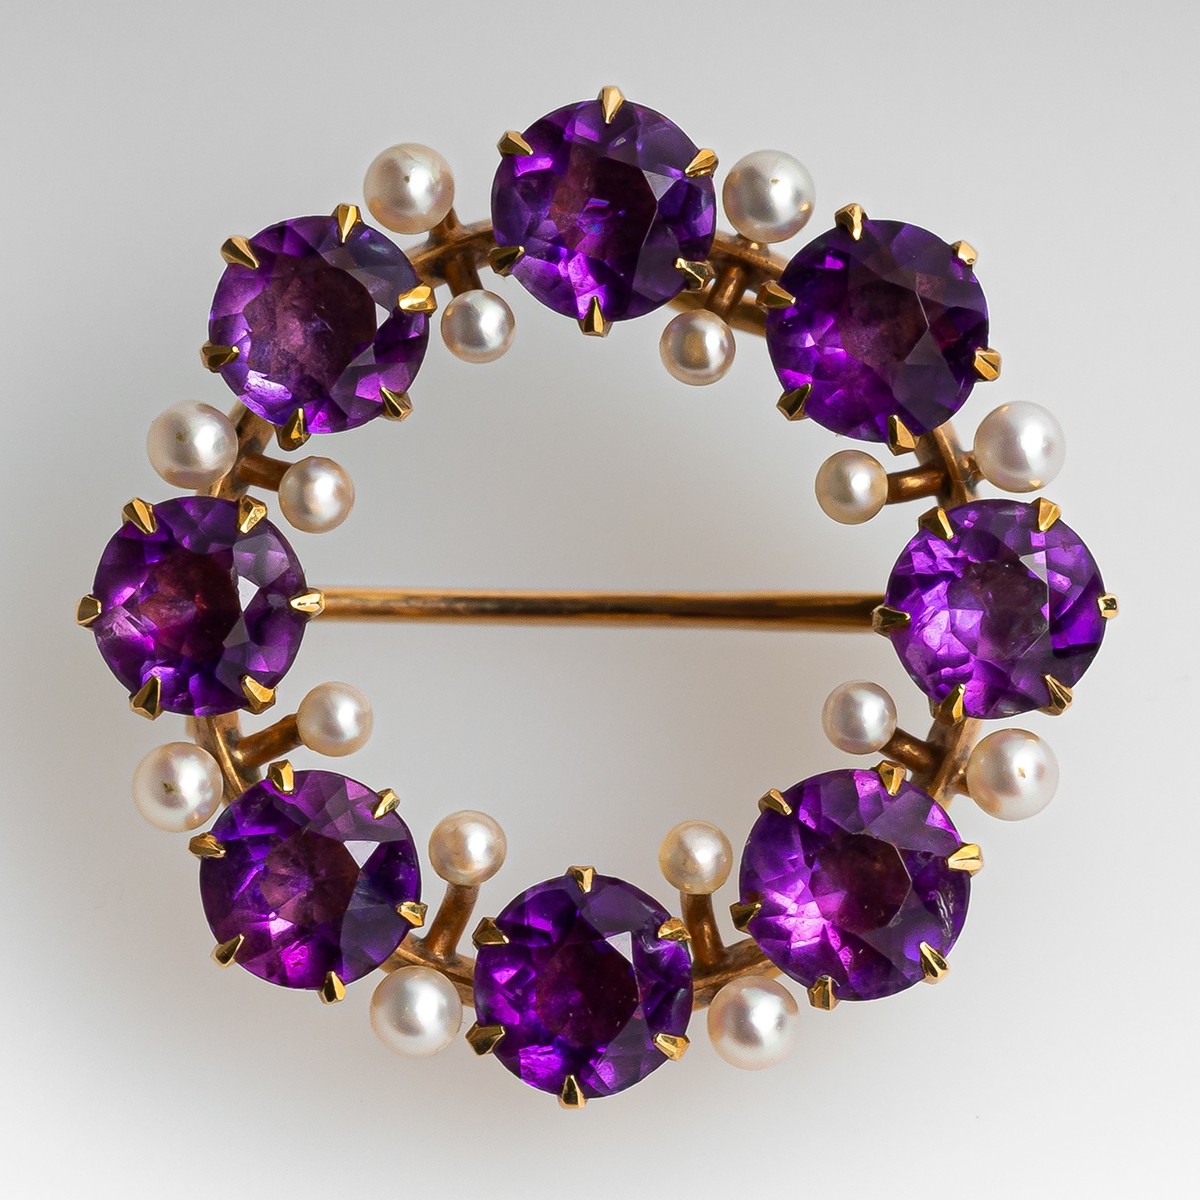 Estate Jewelry 14k Yellow Gold Pin with Amethyst